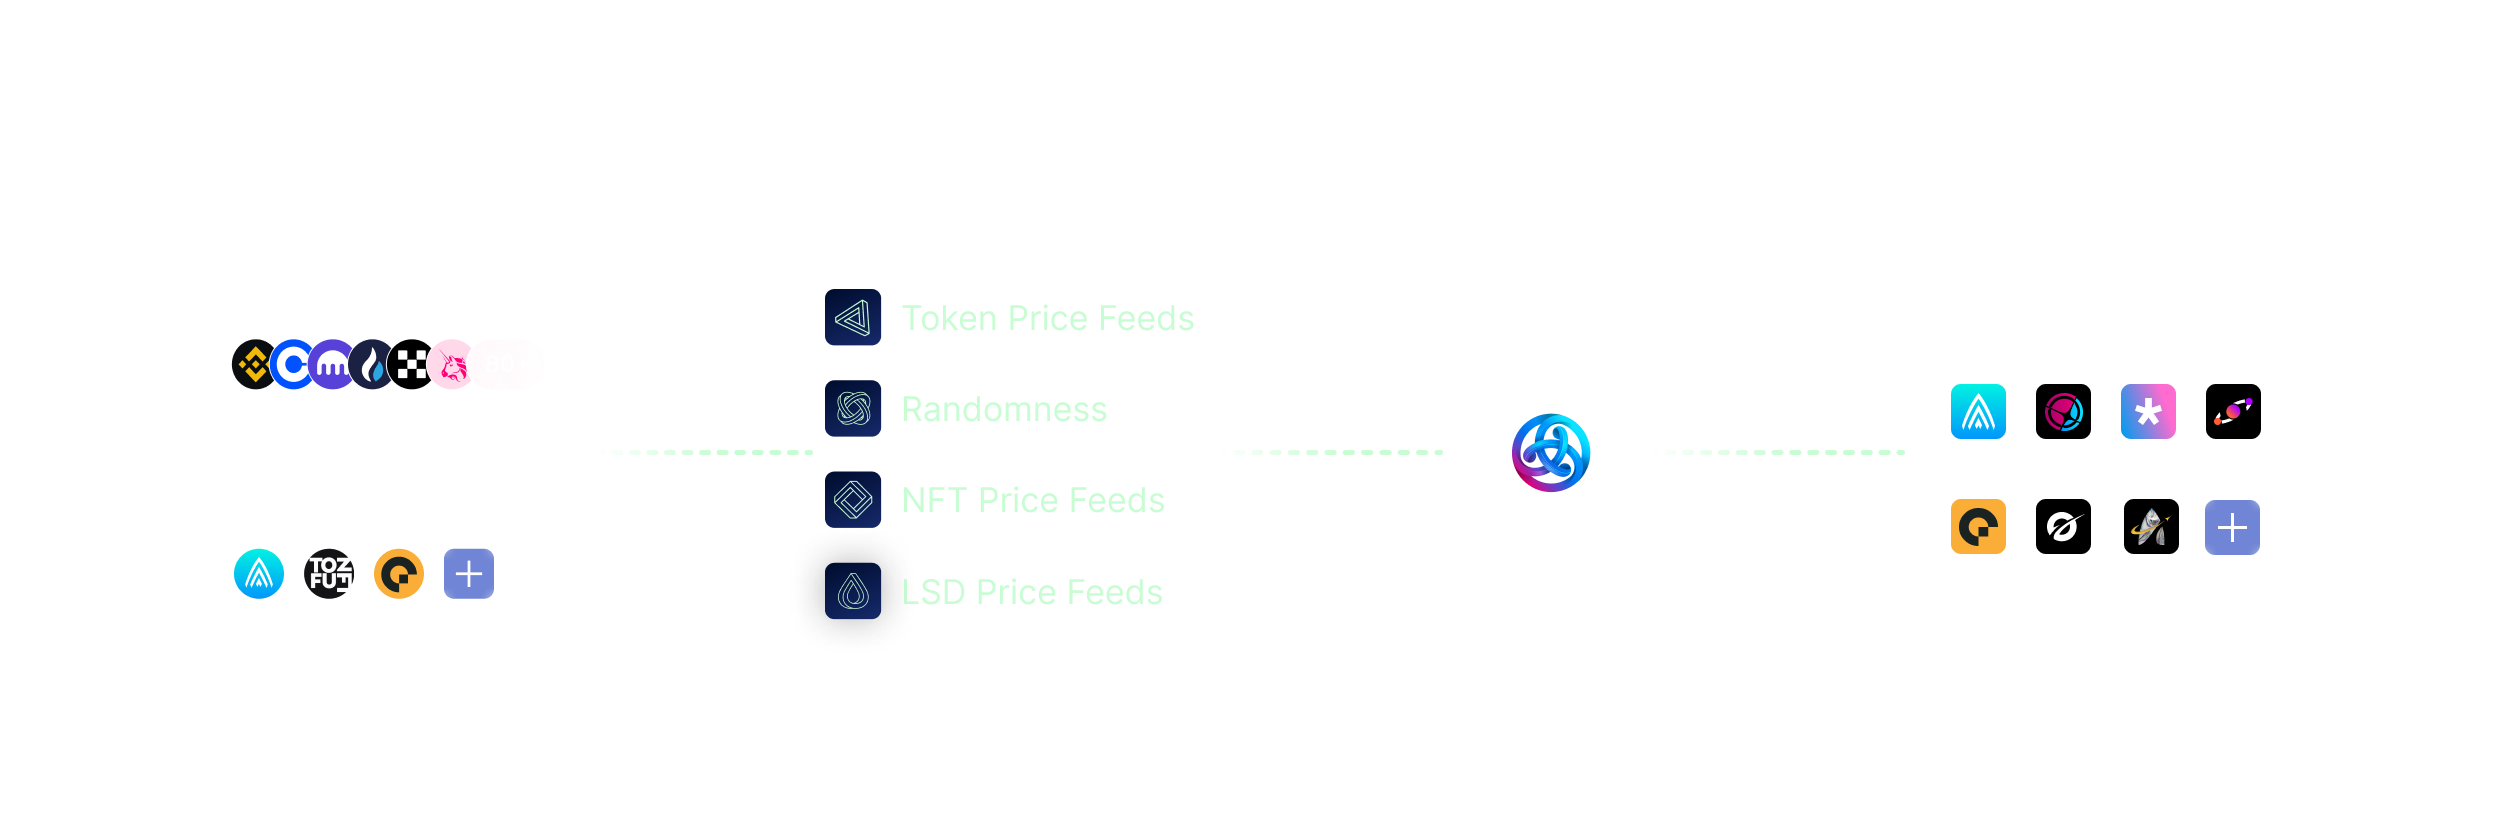 The DIA platform is capable of sourcing data from global DeFi exchanges as well as Astar native exchanges. This allows DIA to provide price oracles for Astar native assets as well as global or cross-chain market prices